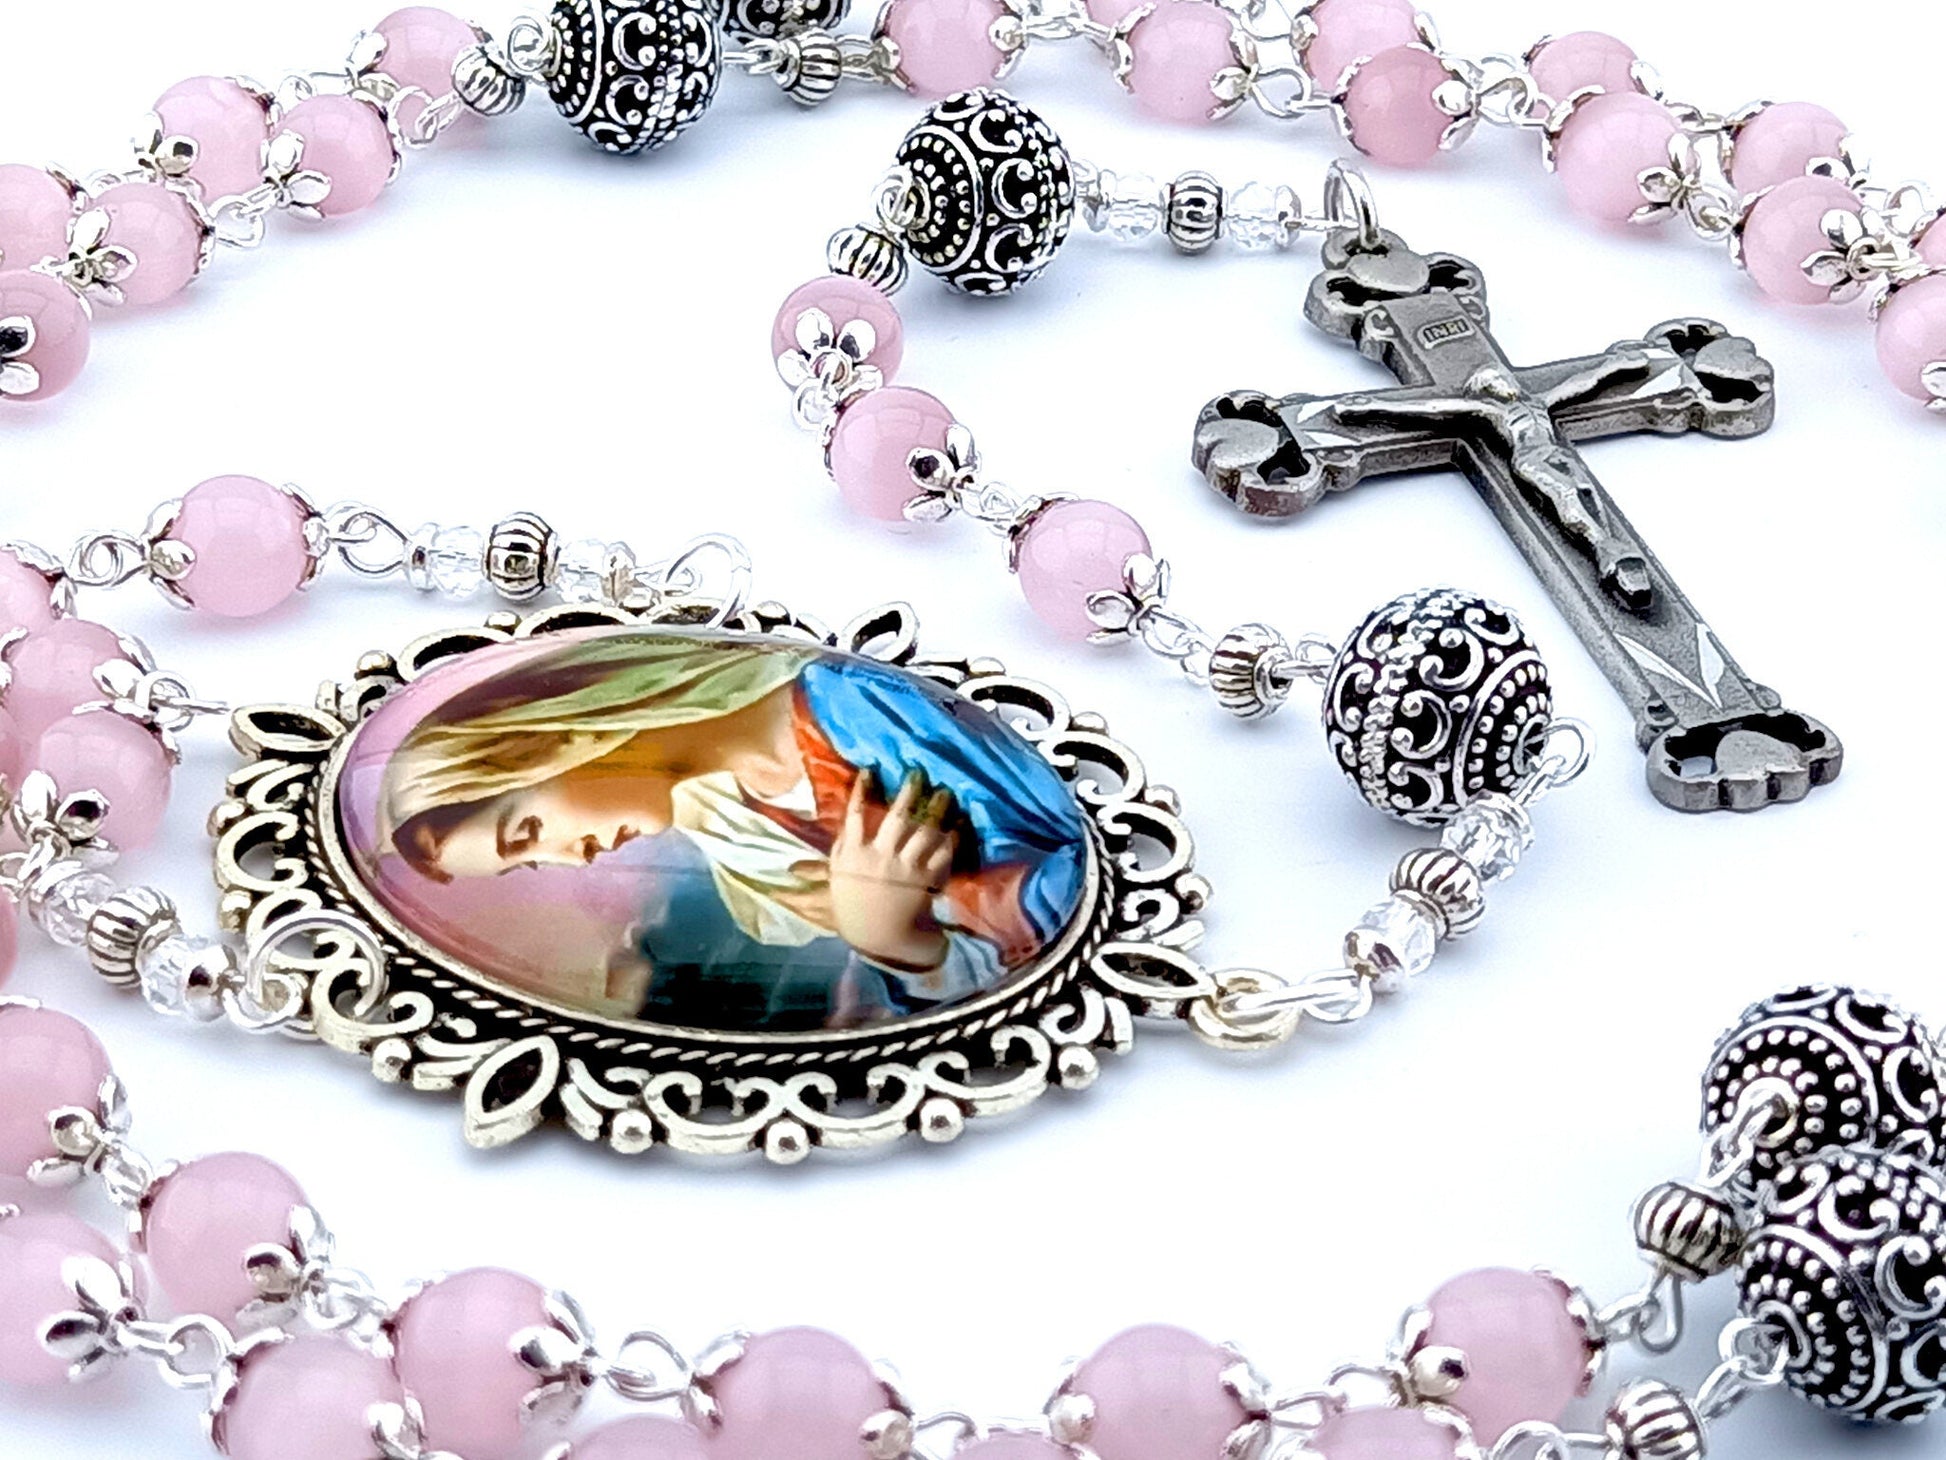 Our Lady's Fiat unique rosary beads with pink glass tigers eye beads, silver pater beads, pewter crucifix and silver picture centre medal.